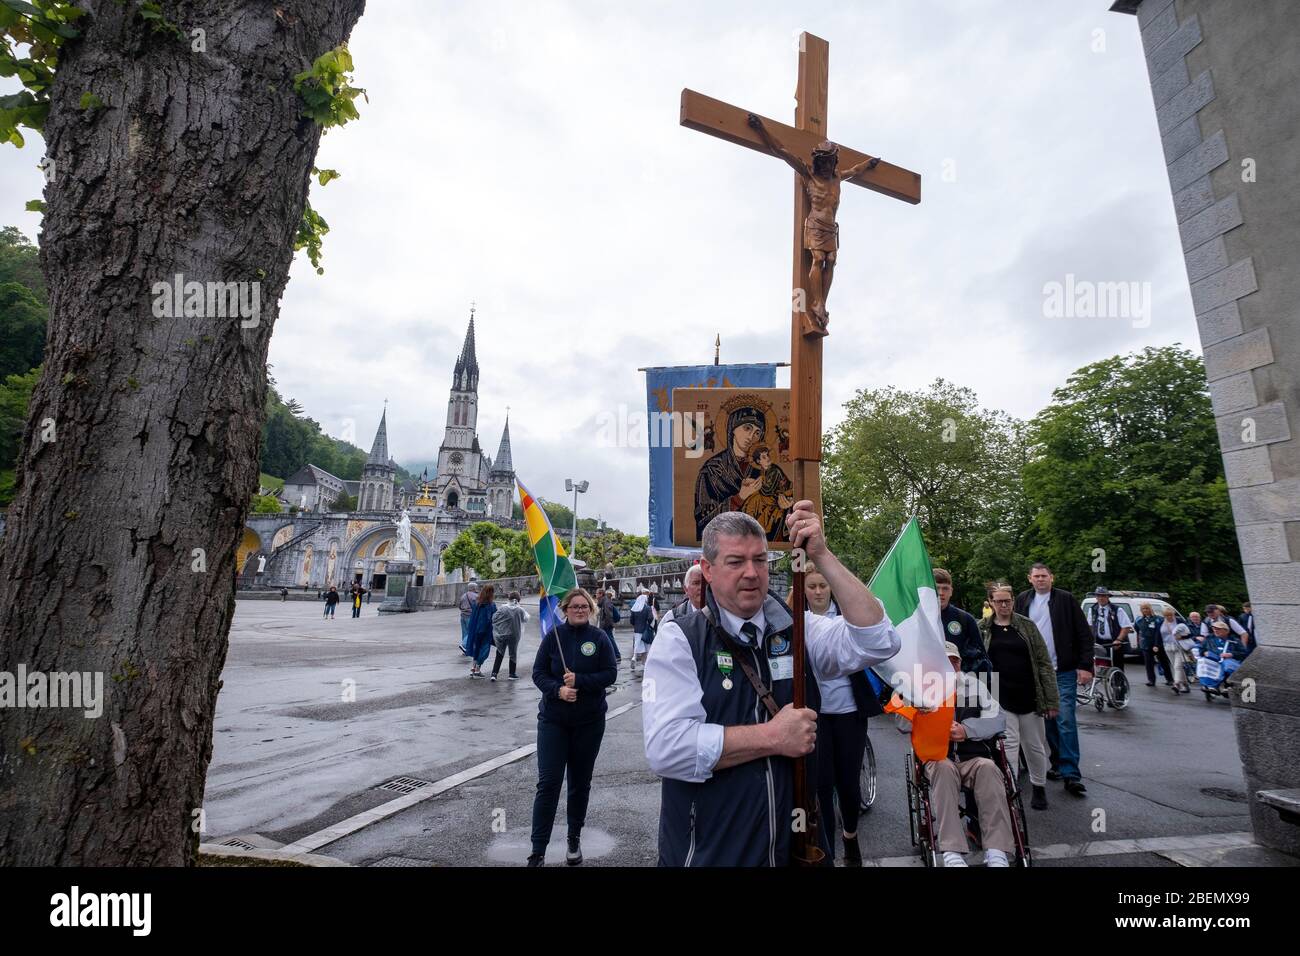 Eirish pilgrims carrying a cross with a sculptire of Jesus Christ walking on the grounds of the Lourdes sanctuary in Lourdes, France, Europe Stock Photo